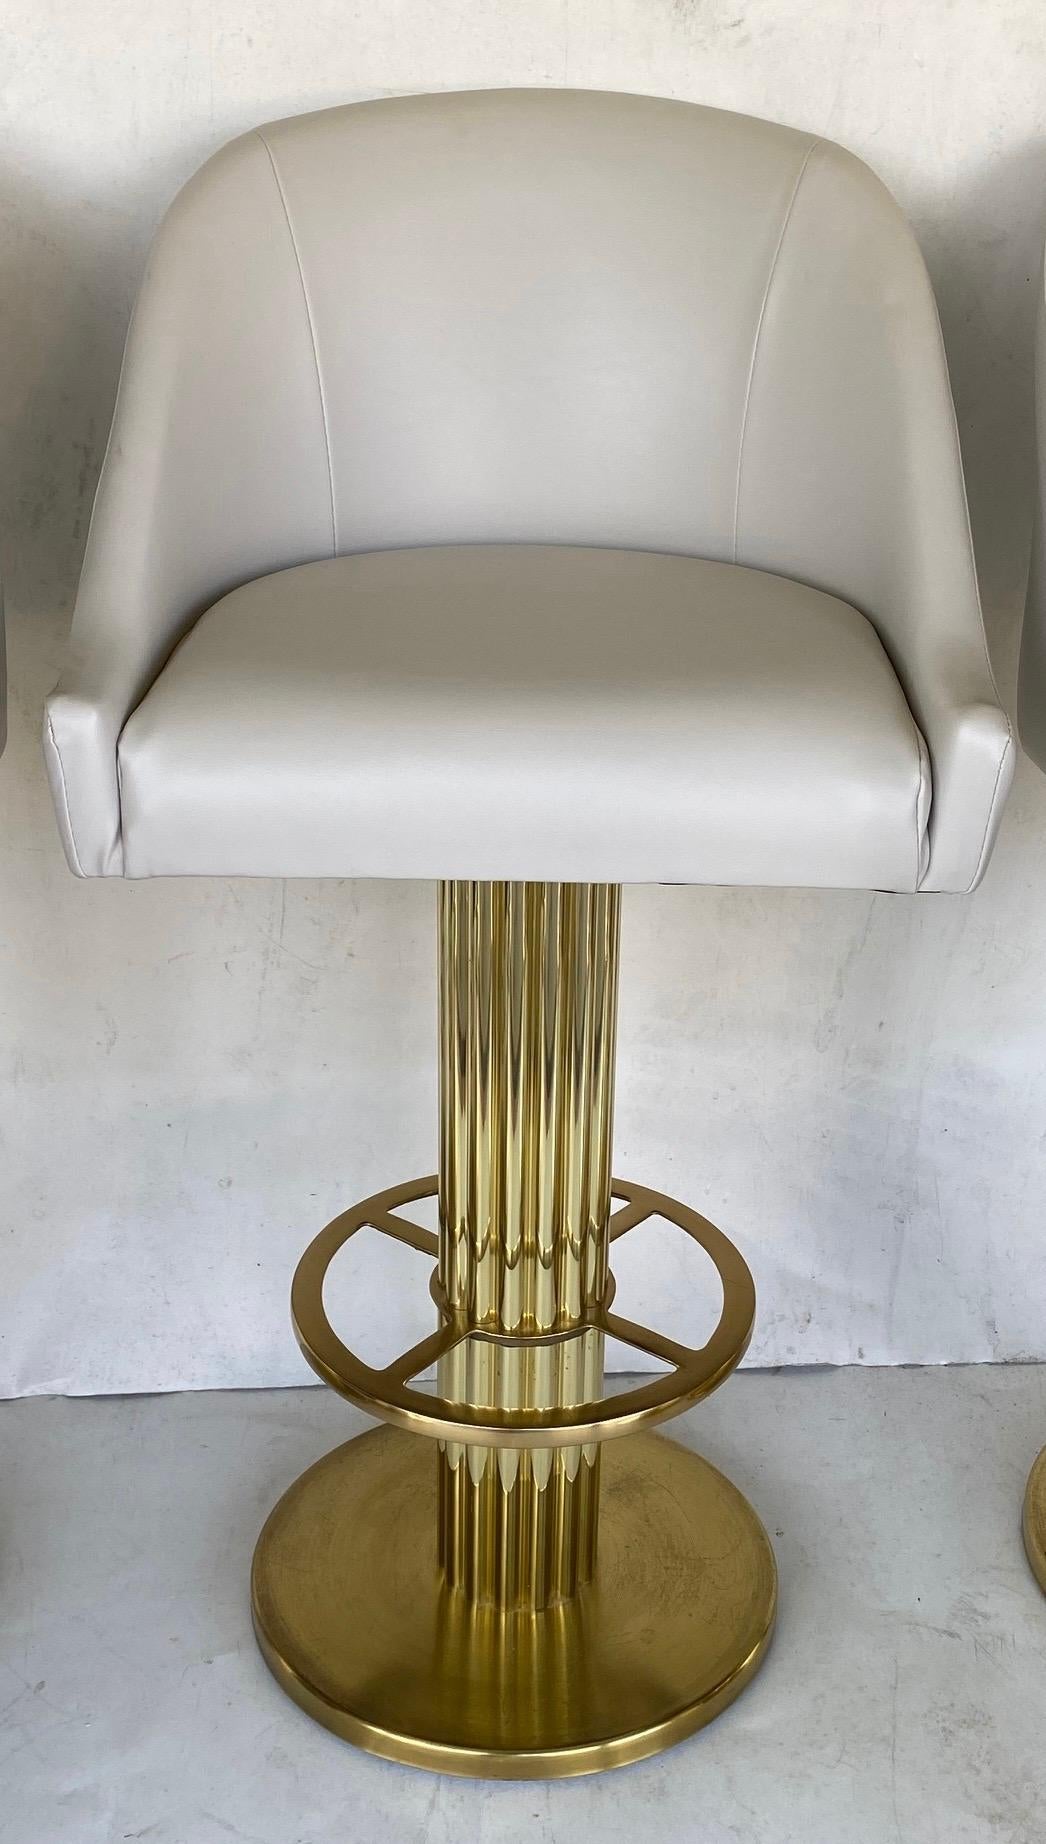 Brass Designs for Leisure Barstools